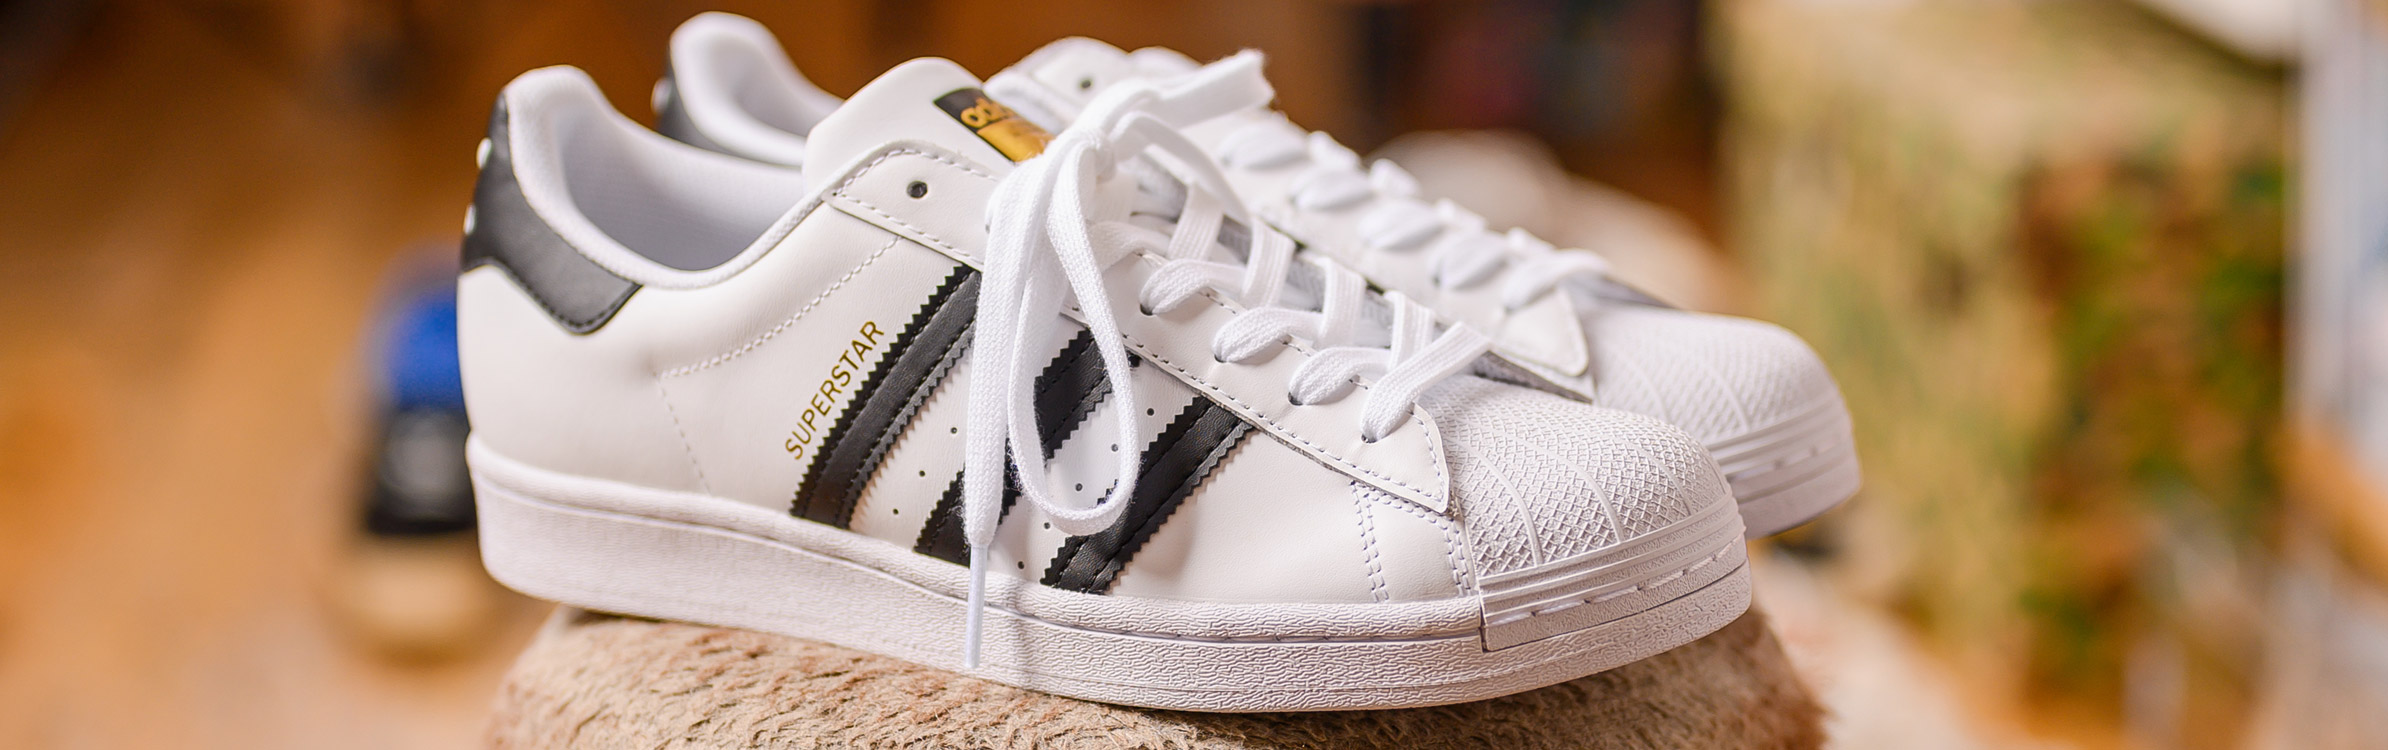 - 2 - Adidas Superstar | adidas outlet store maryland mall